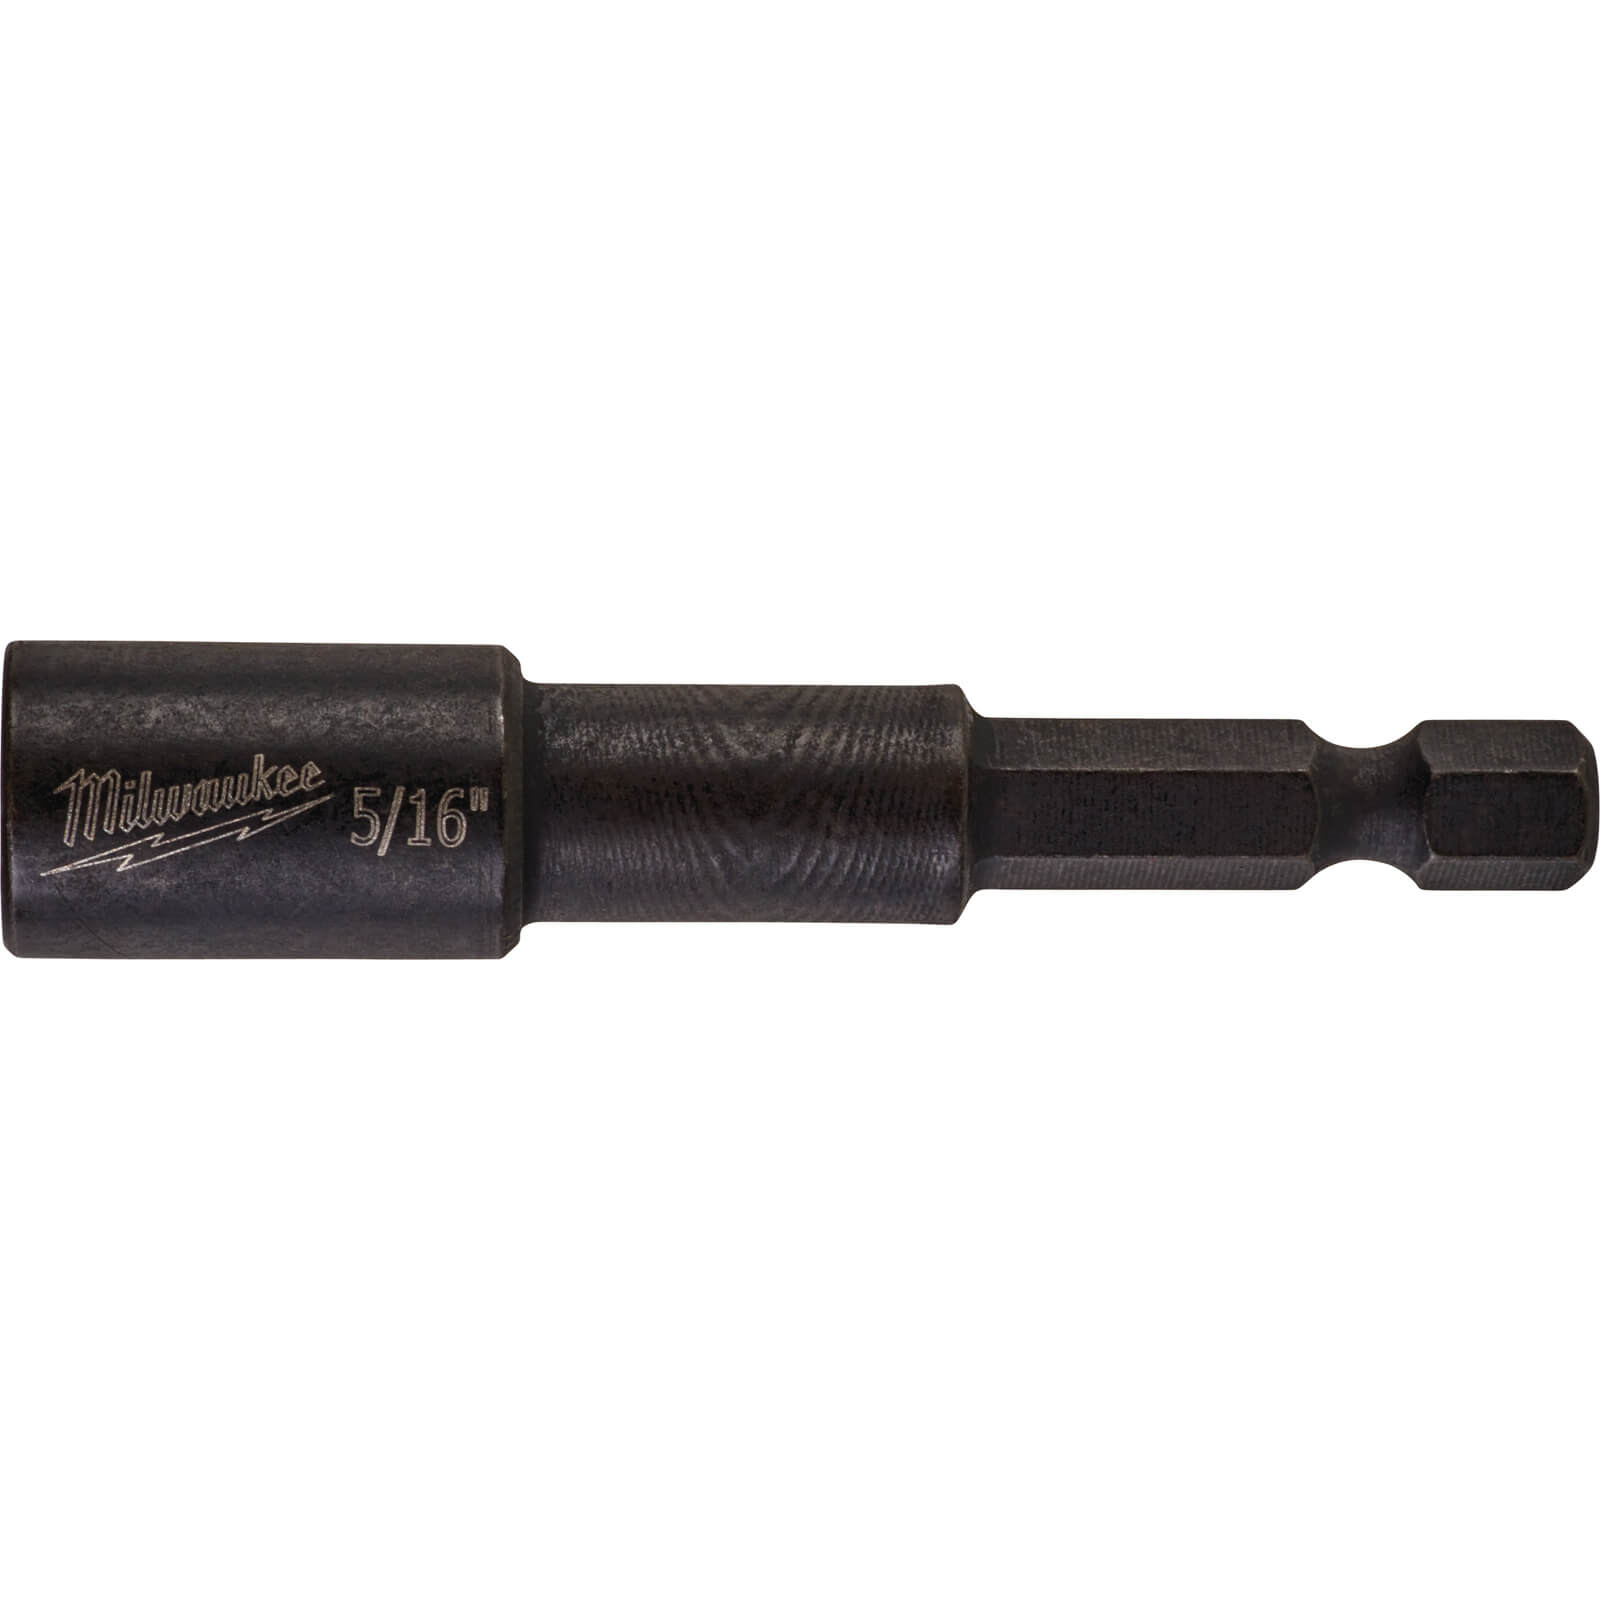 Image of Milwaukee Shockwave Impact Nut Driver Imperial 5/16"